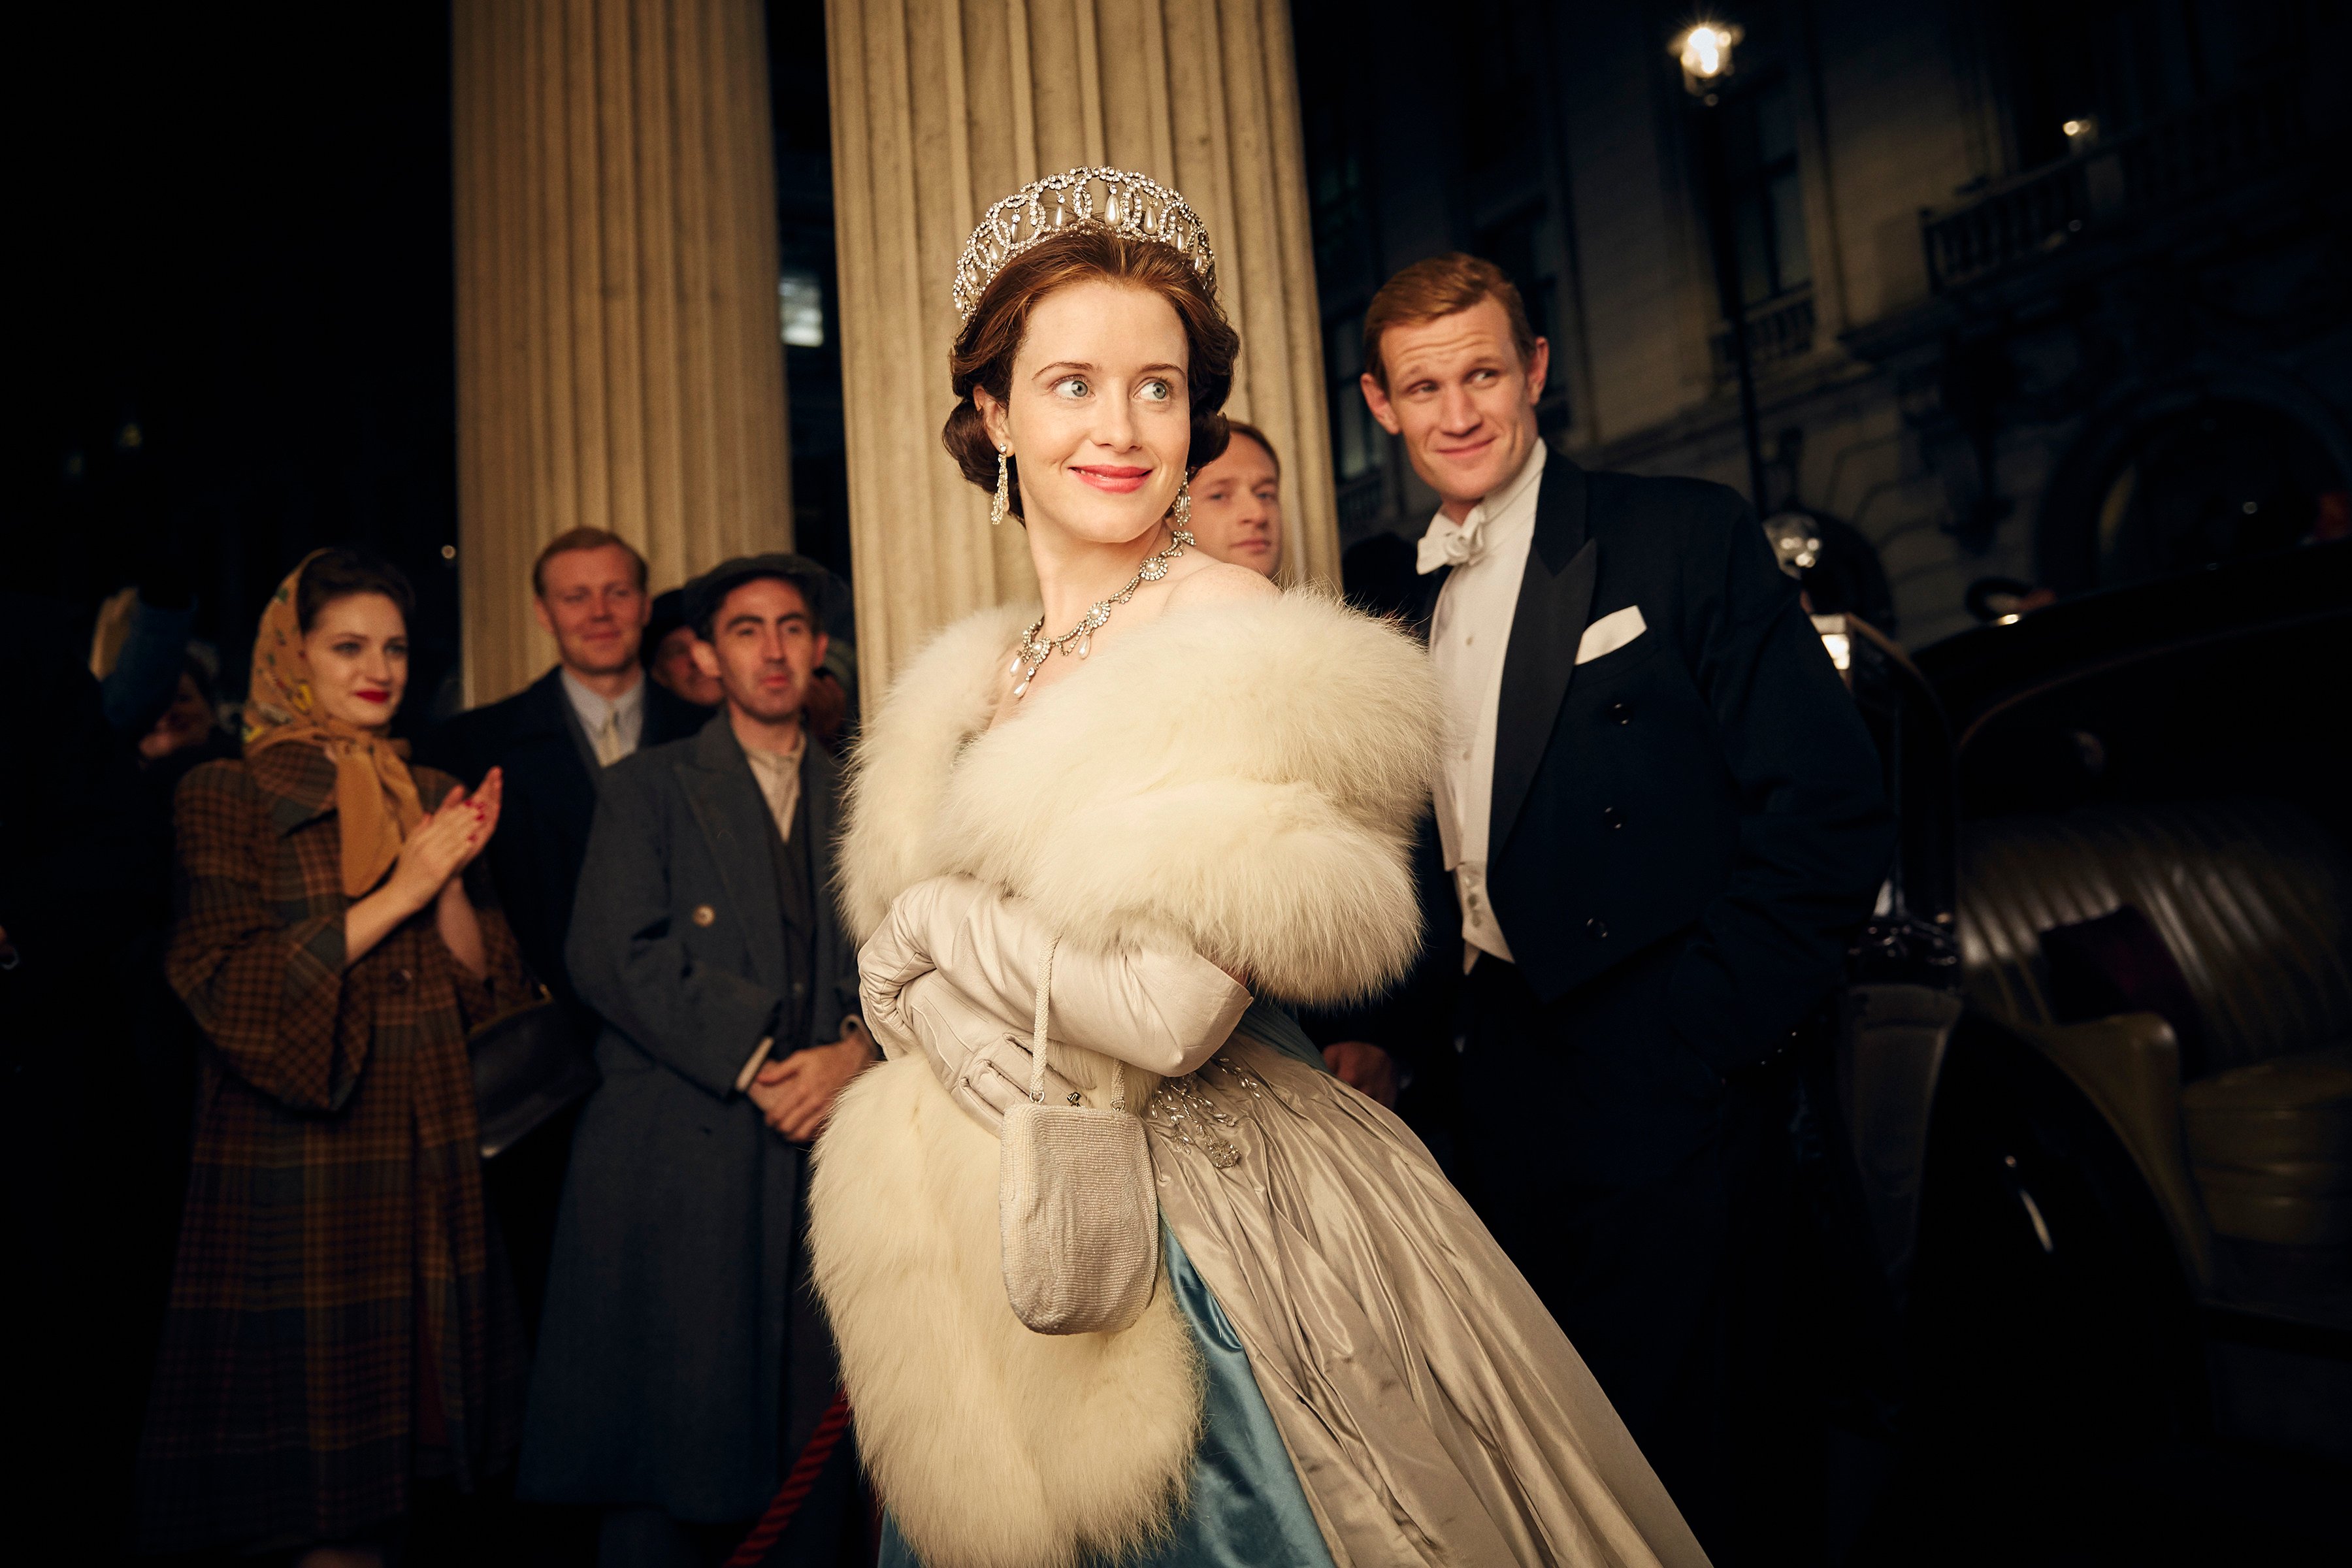 Props from Netflix’s The Crown are going on the block at auction house Bonhams after the TV drama’s finale. Photo: Handout